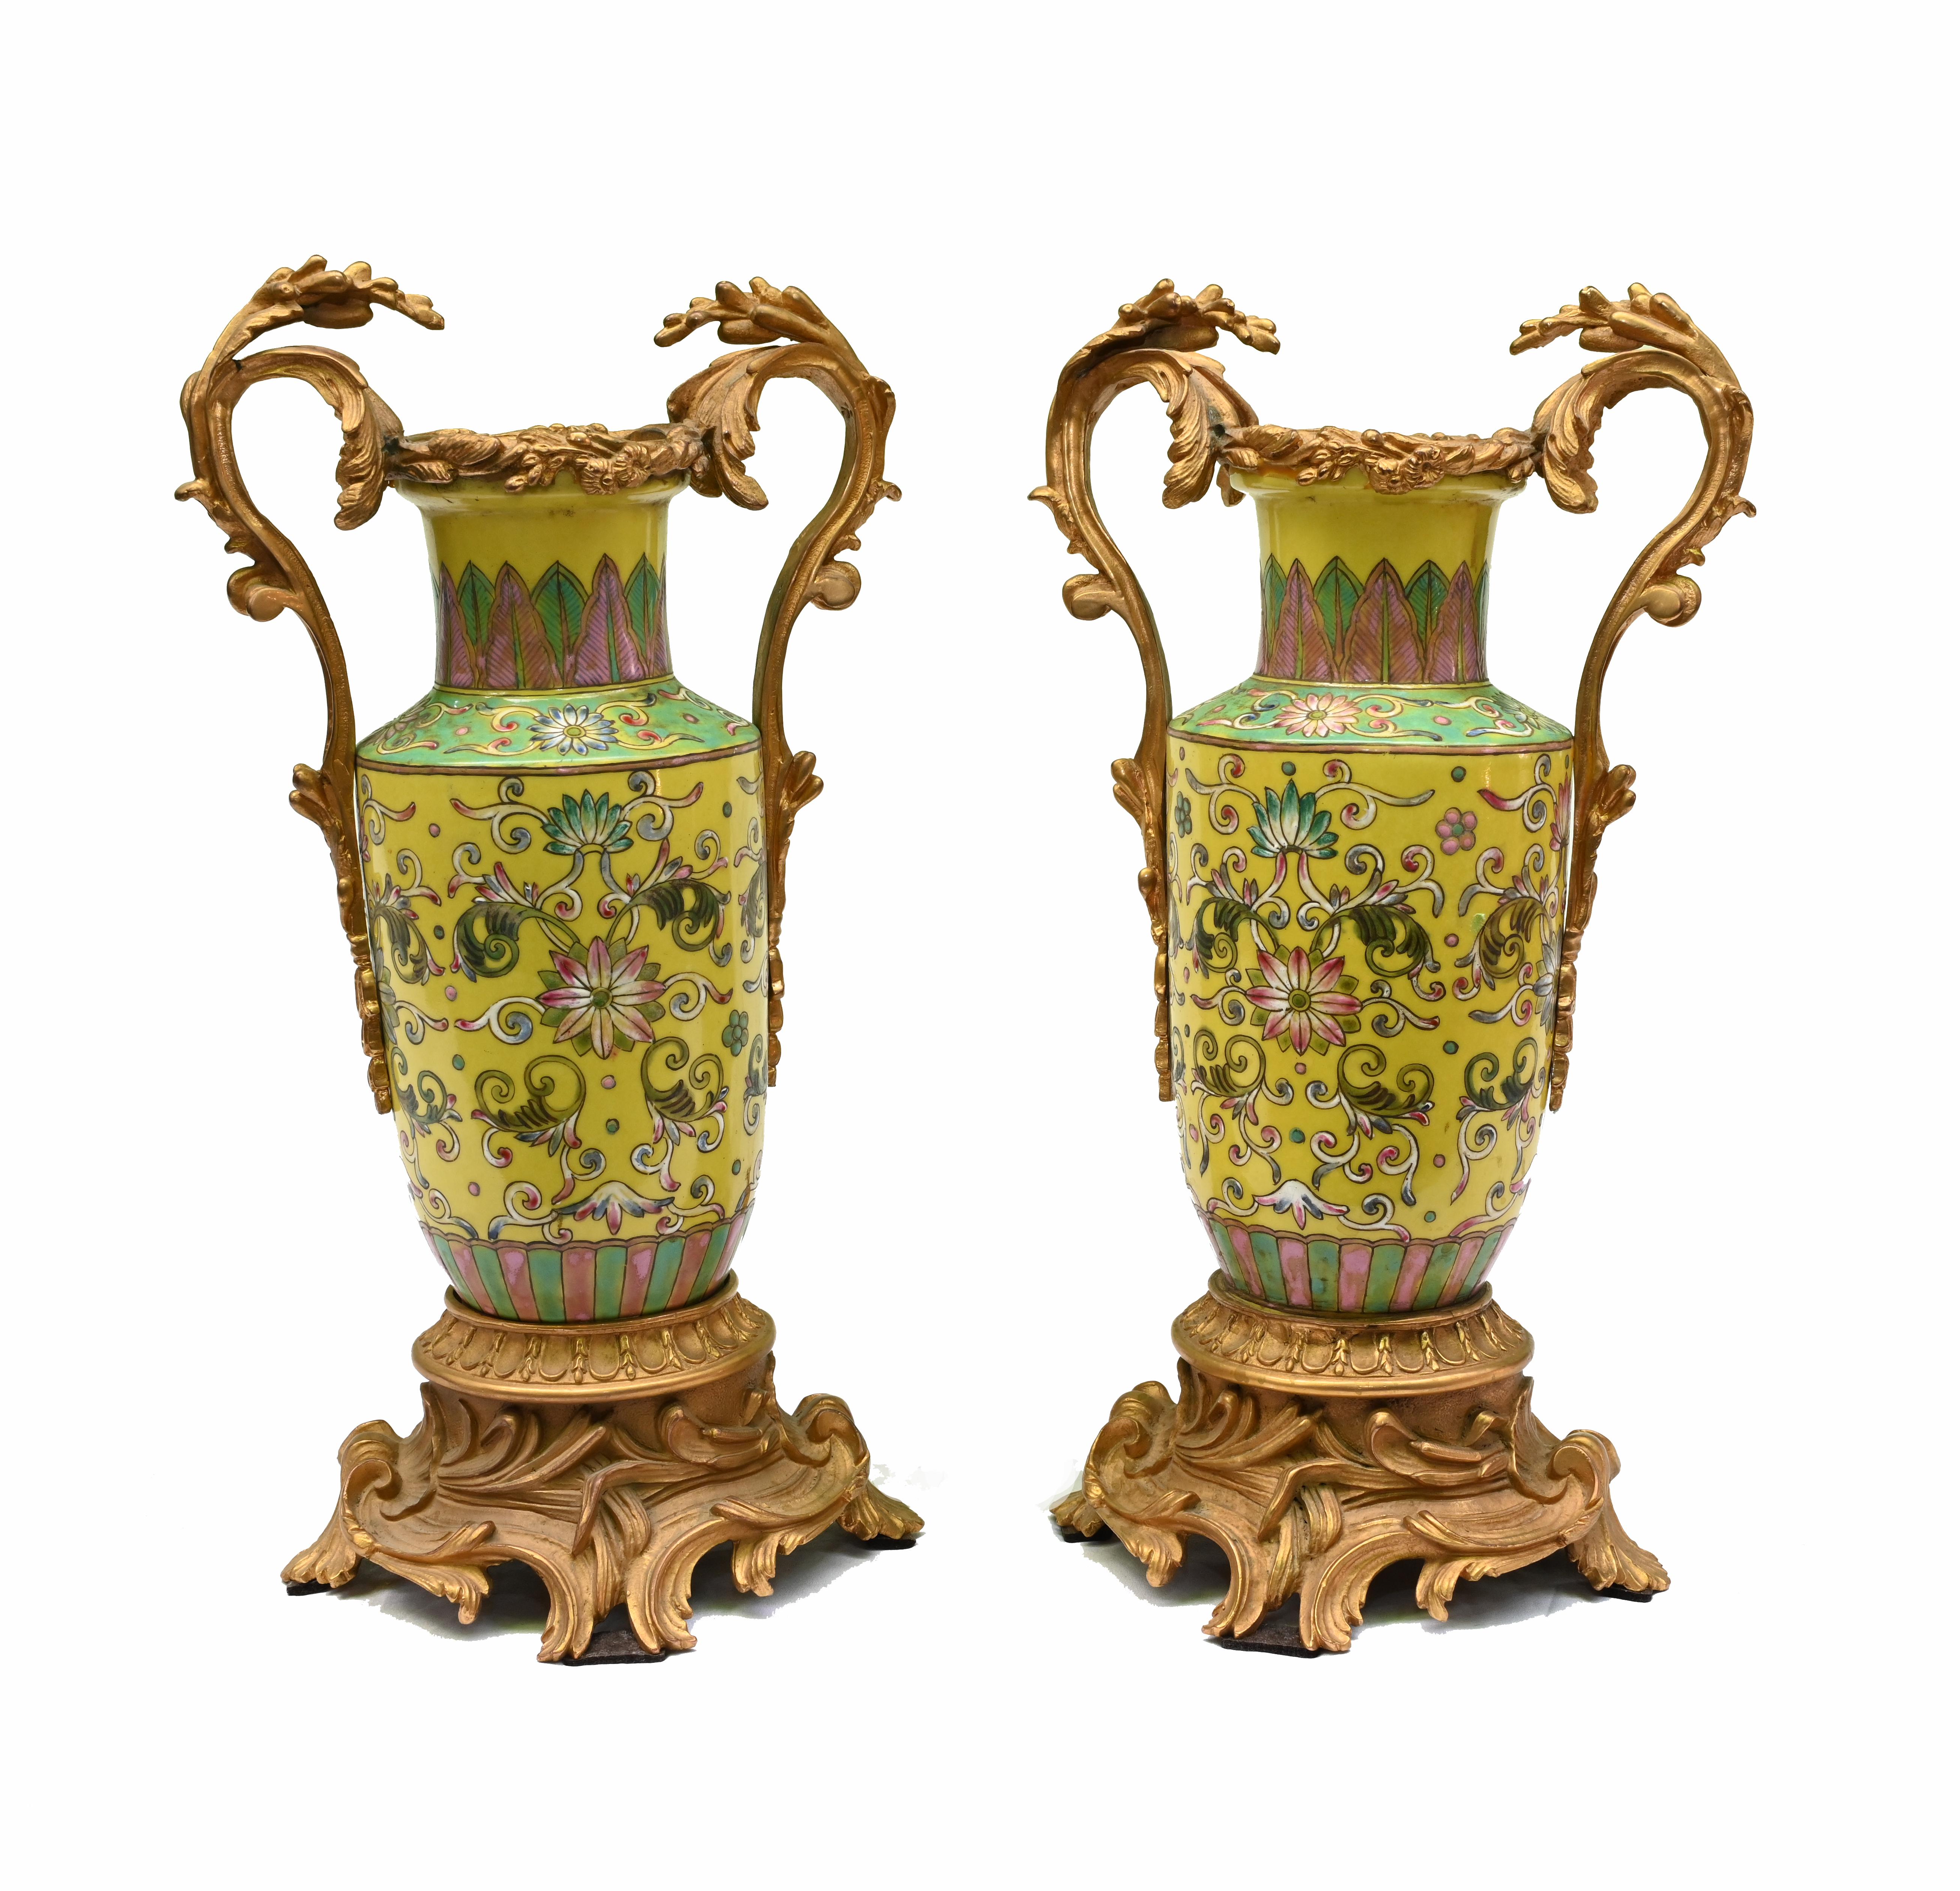 Elegant pair of antique Chinese Famille Jaune porcelain vases on gilt mounts
Circa 1920 on this pretty pair decorated with floral motifs
We bought these from a private residence in London's Mayfair
Offered in great shape ready for home use right